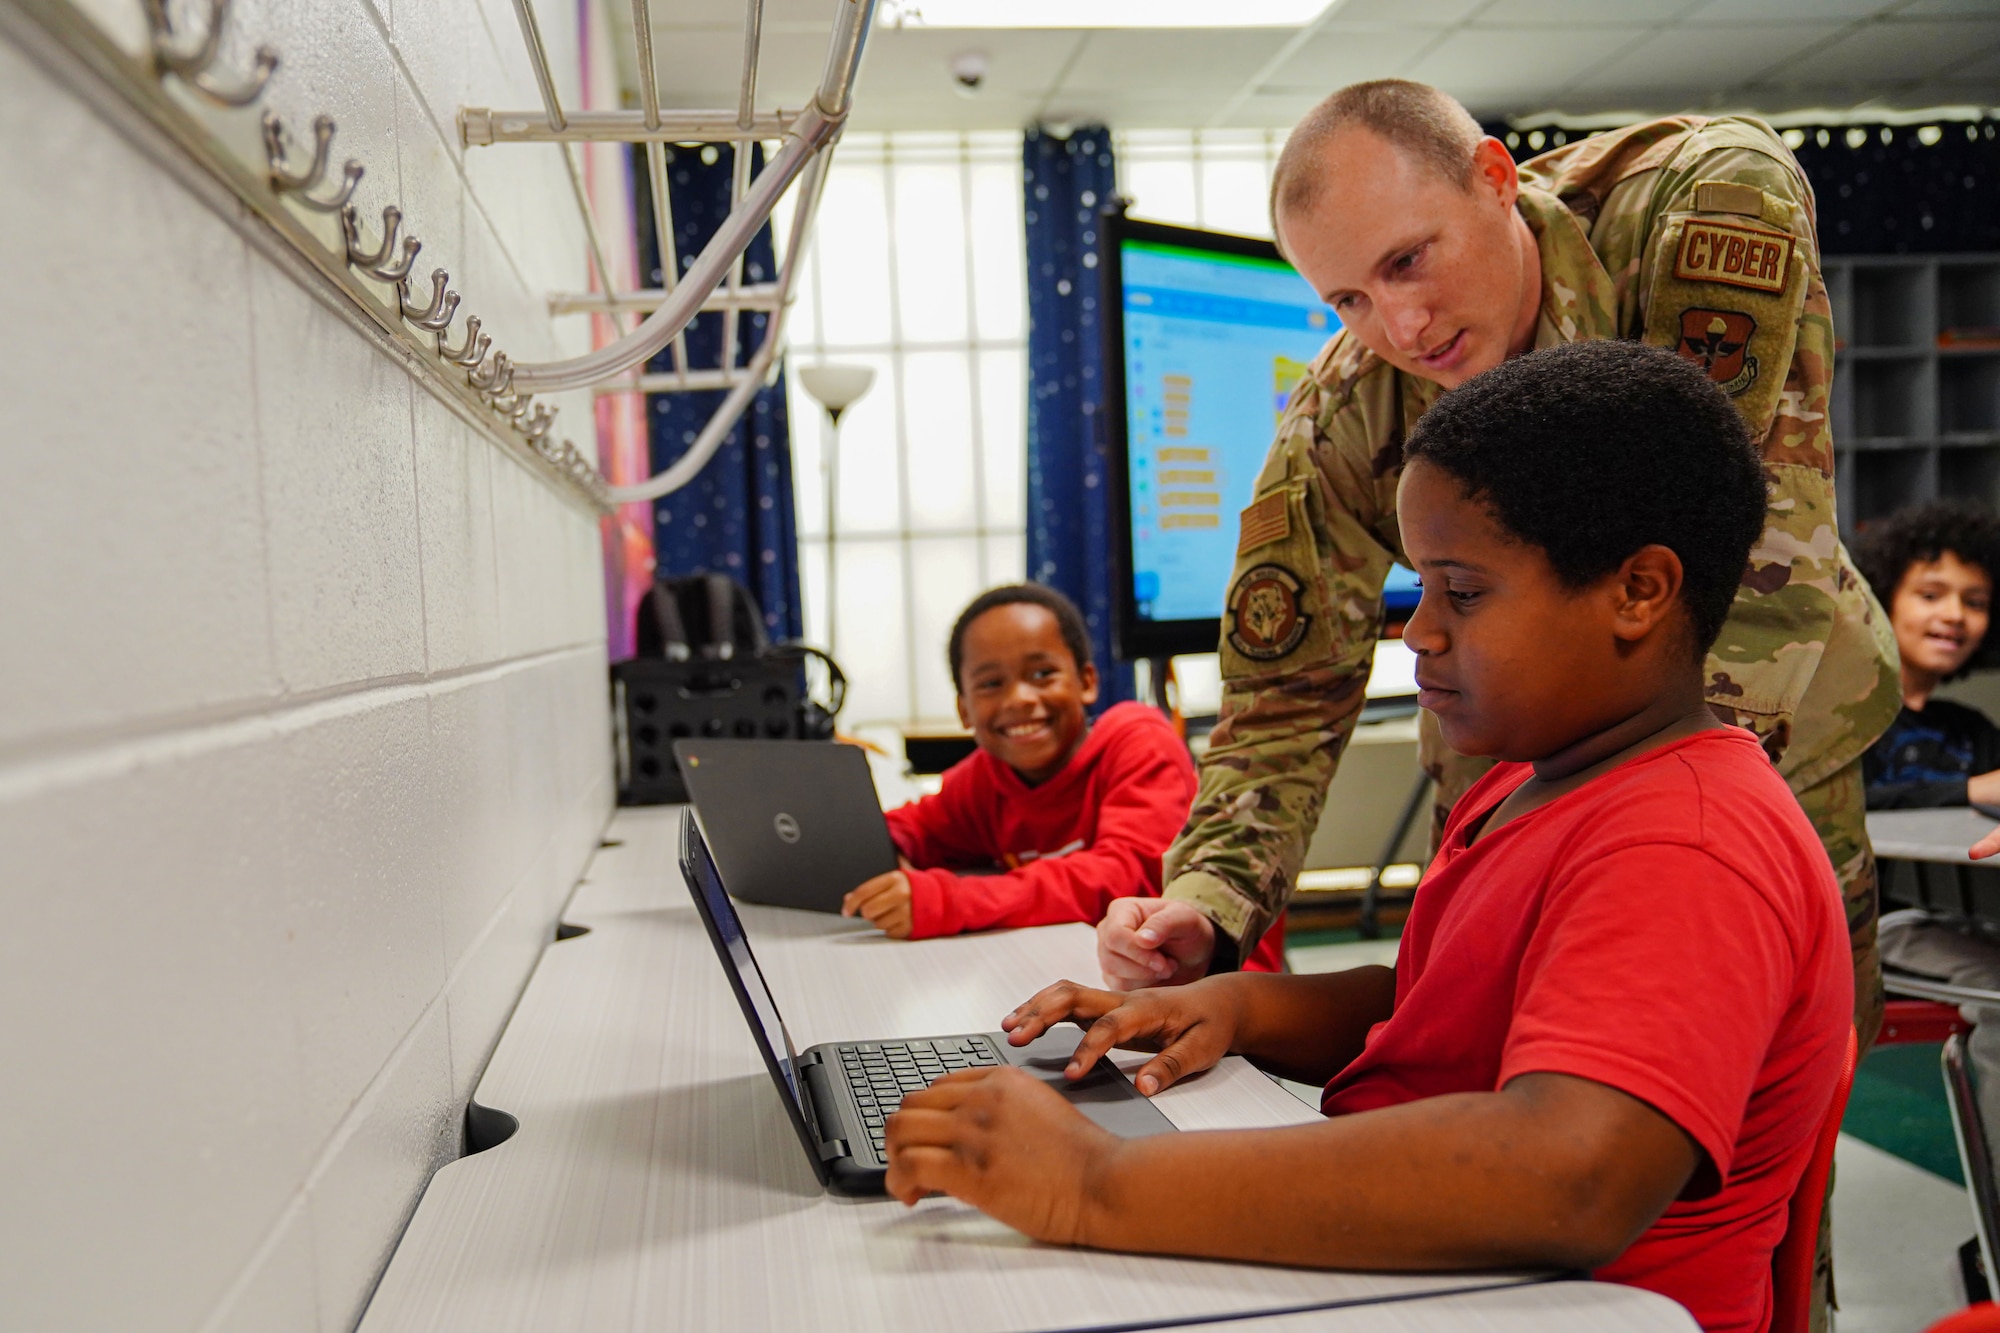 U.S. Air Force Tech Sgt. Shane Balkcom, 336th Training Squadron learning program manager, shows a student how to create basic algorithm blocks at Back Bay Elementary School on March 23, 2023. The 336th TRS collaborated with Back Bay Elementary to teach 4th grade students the basics of programing through a seven week course.